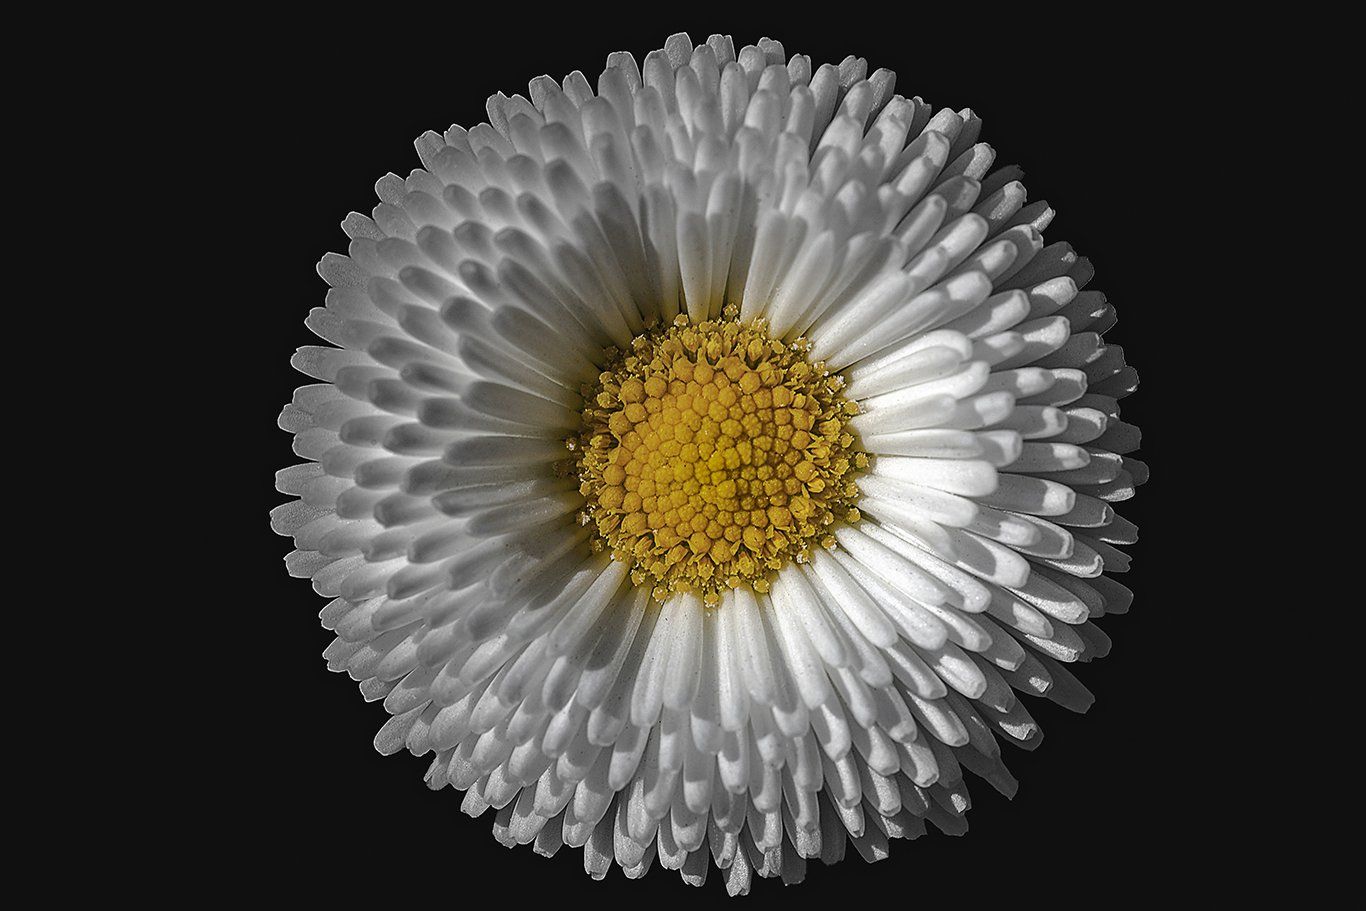 Floral Isolation Photo Gallery by David Ferguson